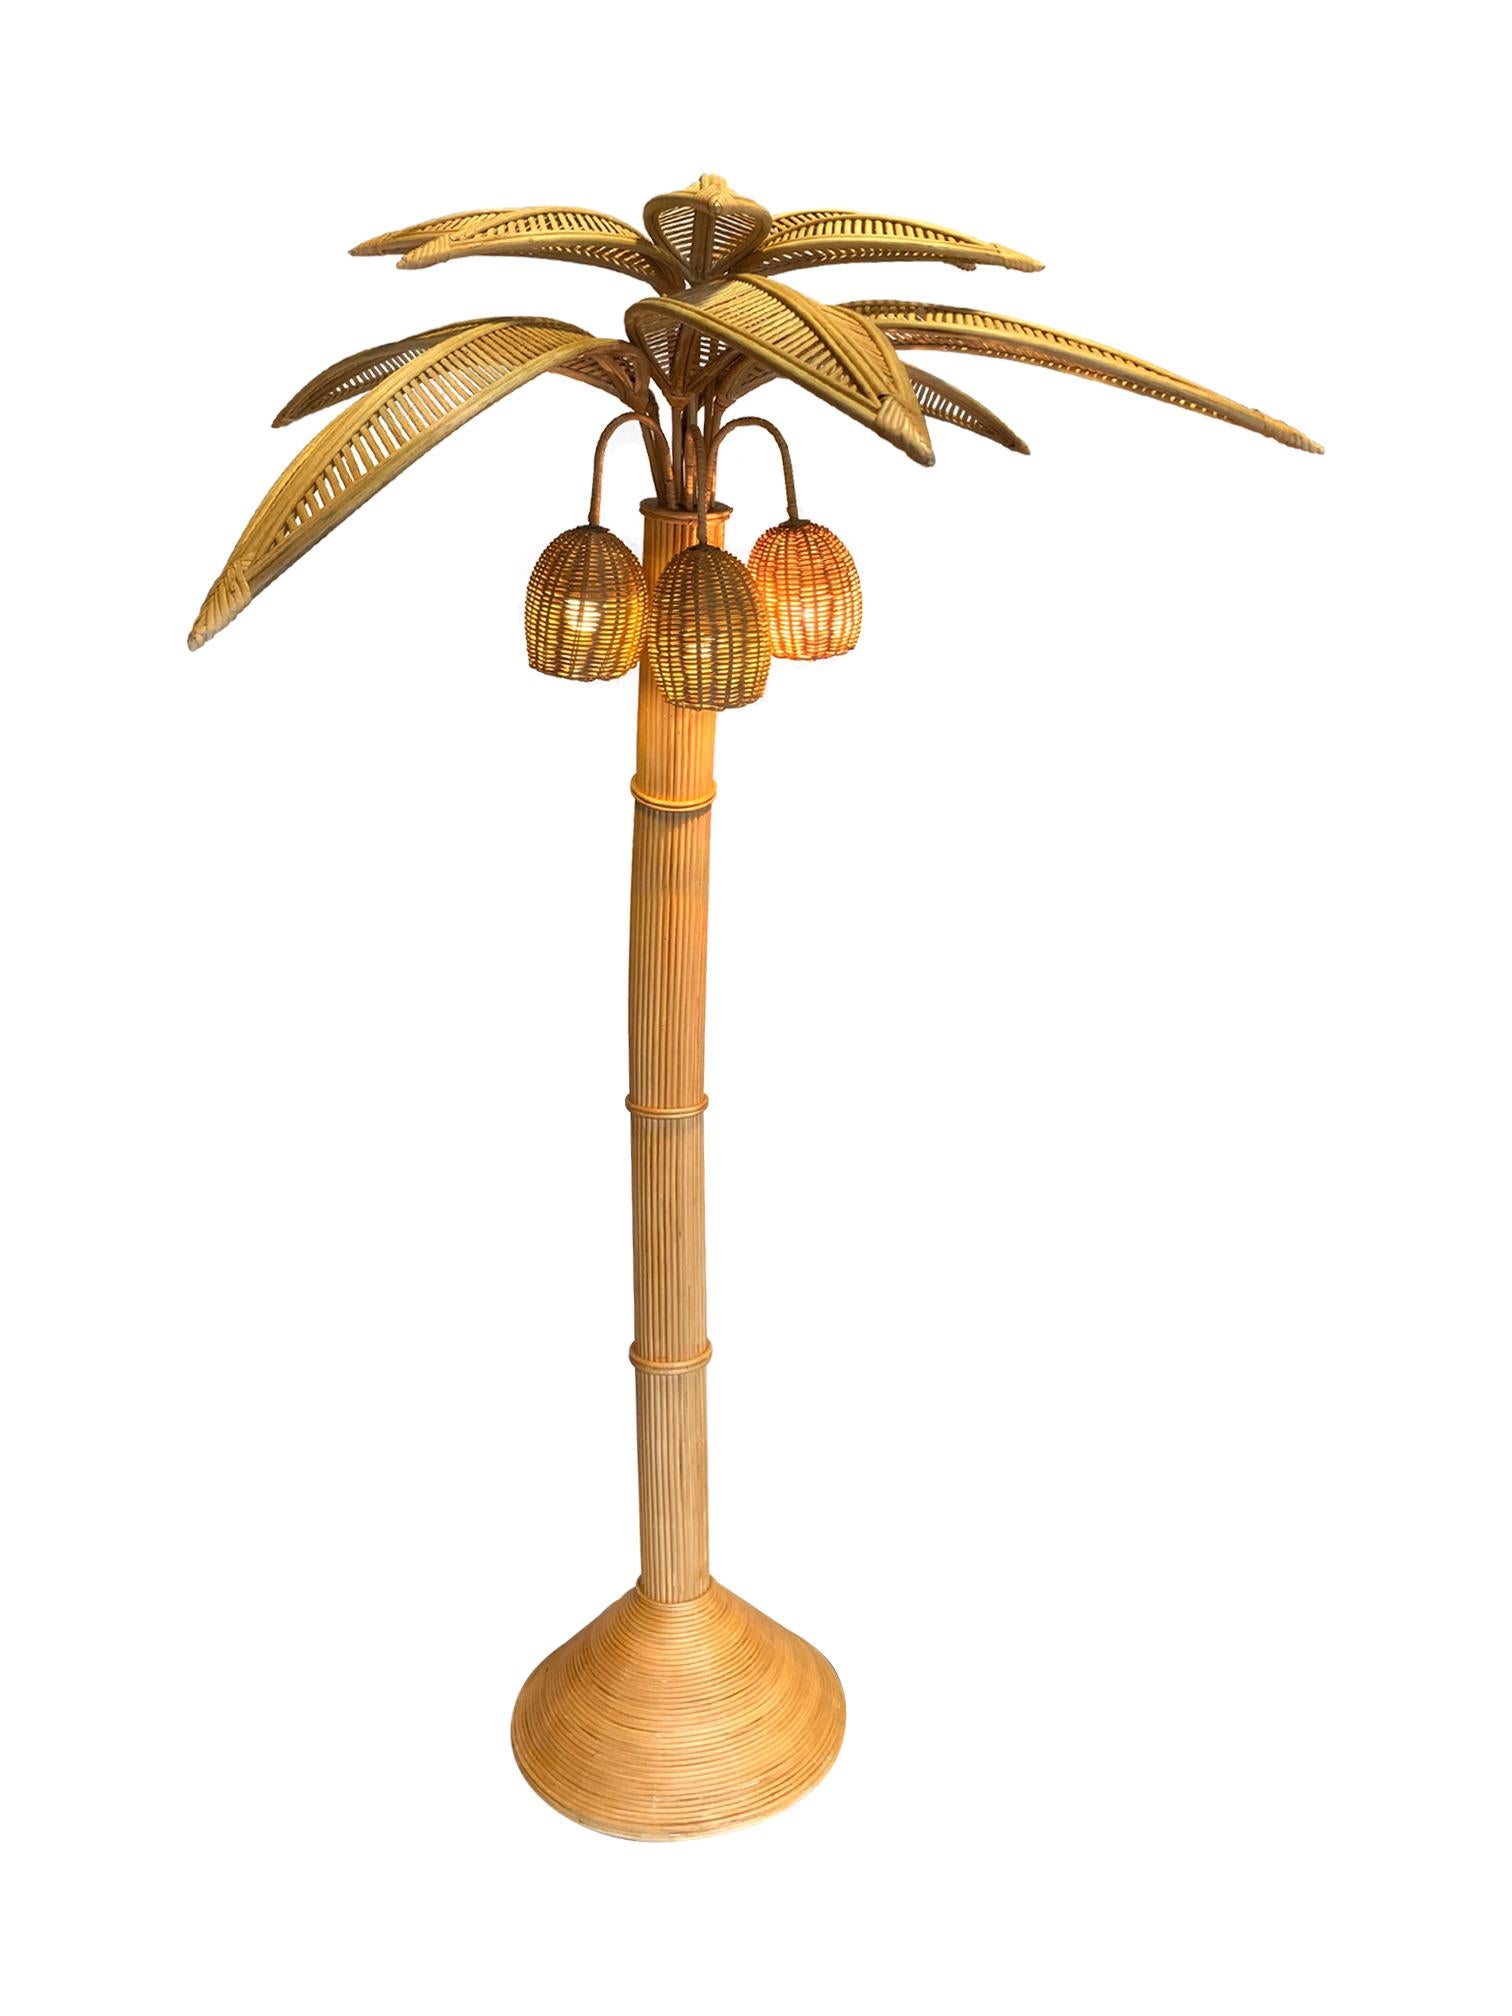 French Large Rattan Palm Tree Floor Light, with Three Bulbs in the Coconuts For Sale